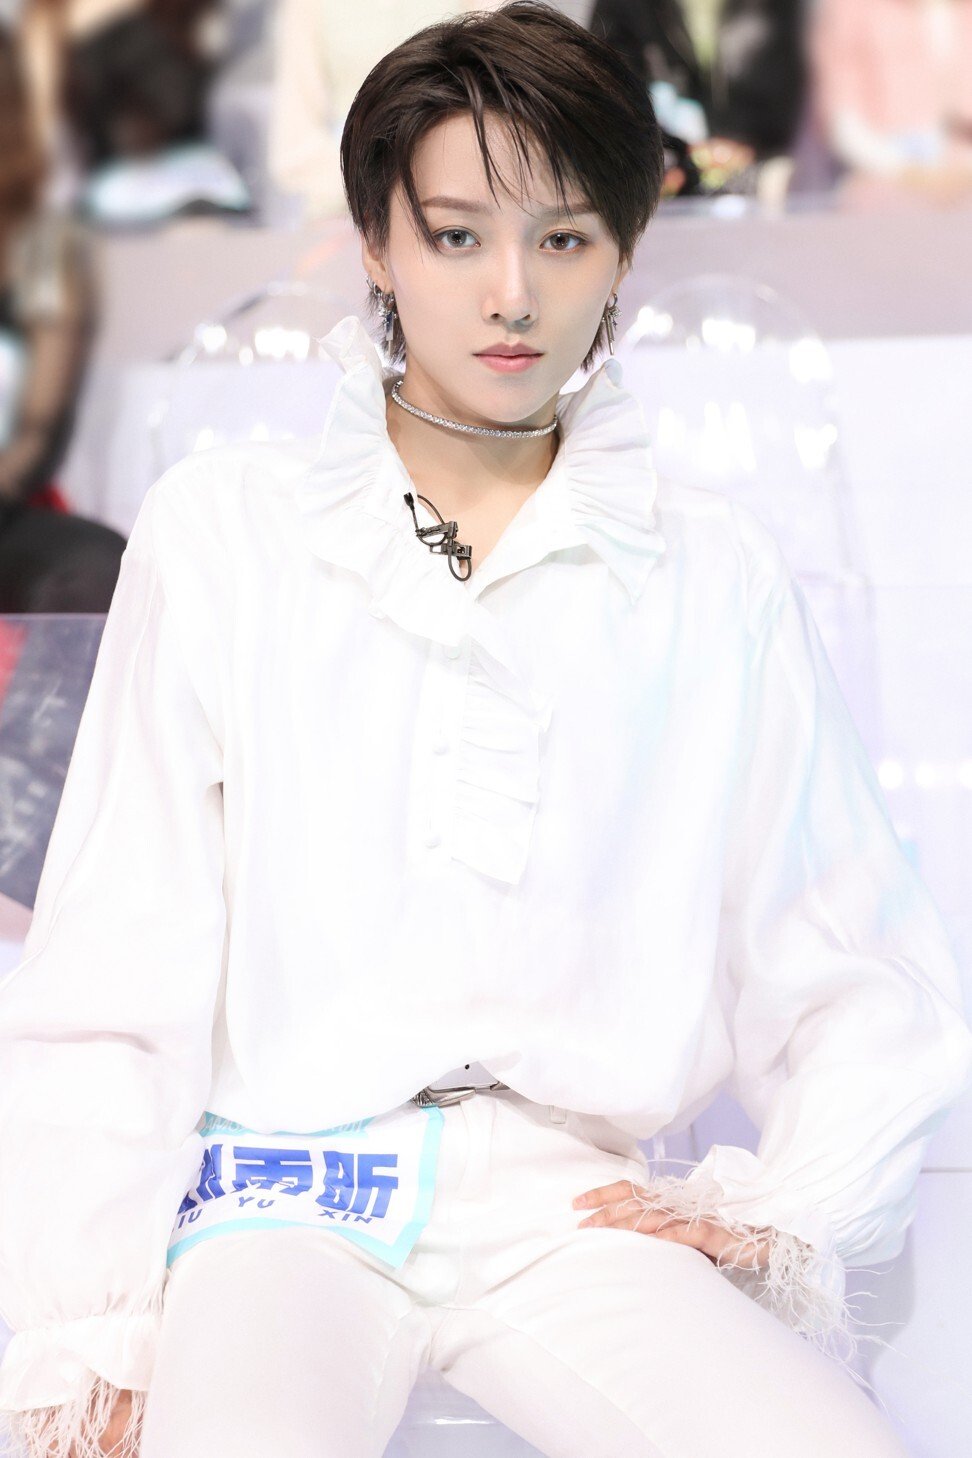 In Youth With You Season 2, Liu mixed her tomboy looks with superb dancing and singing skills. Photo: iQiyi